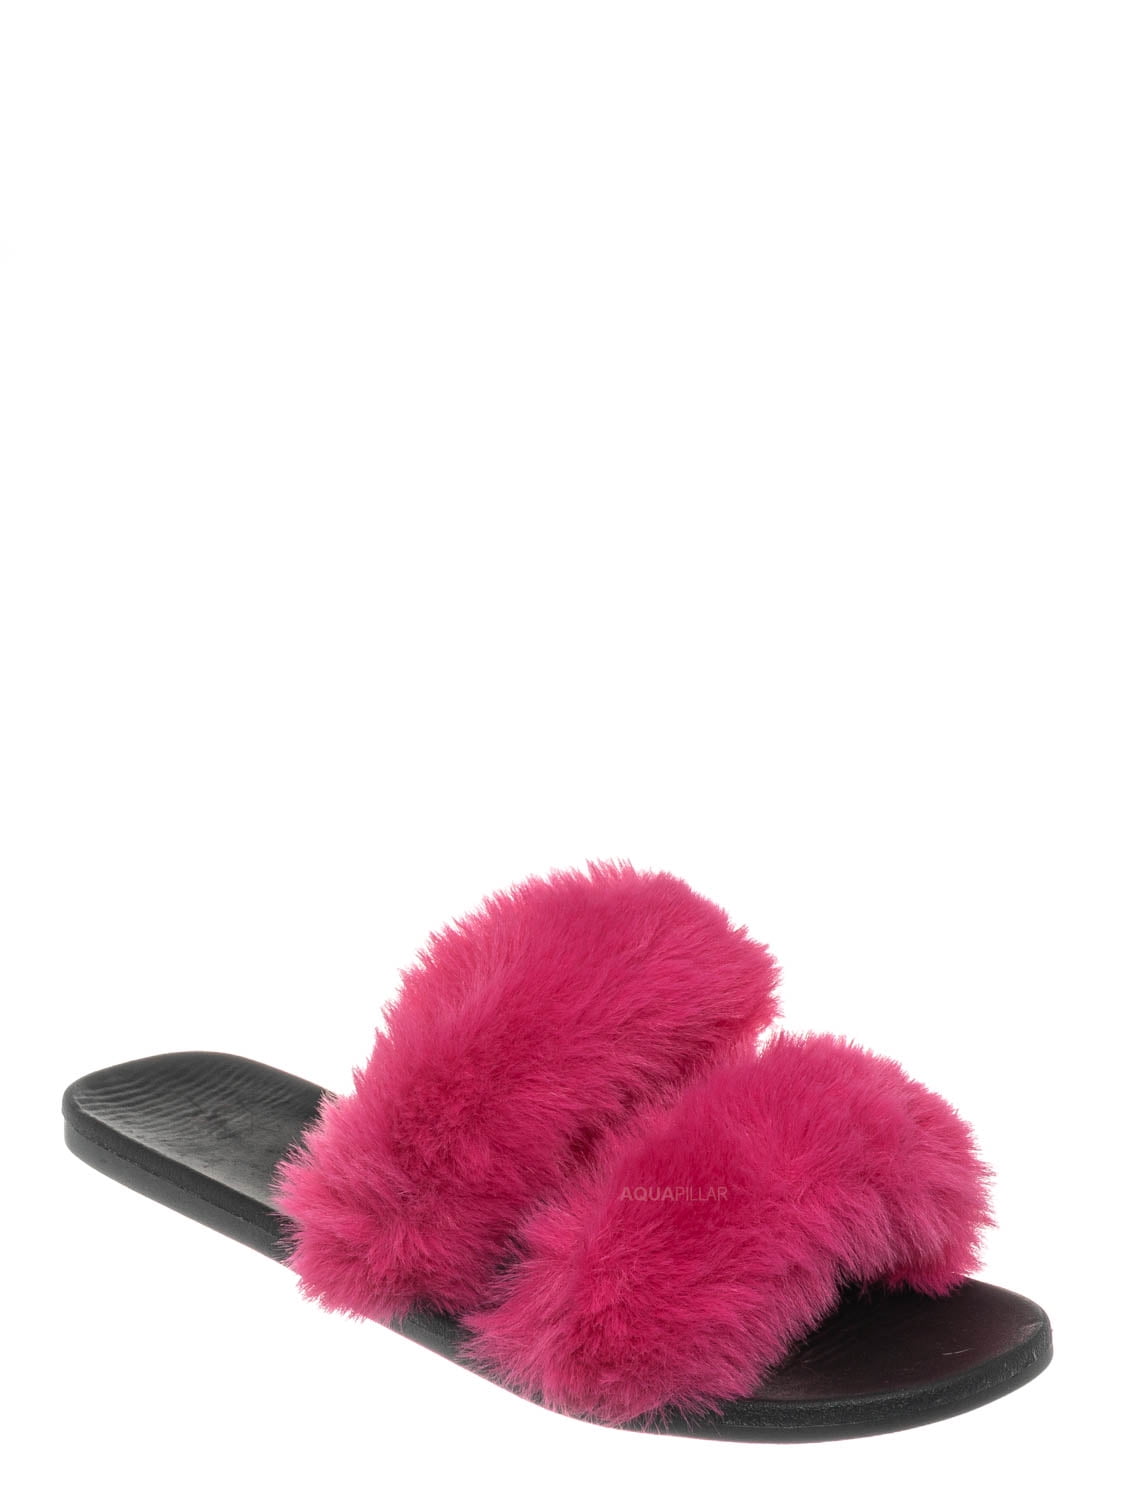 bamboo slippers fuzzy